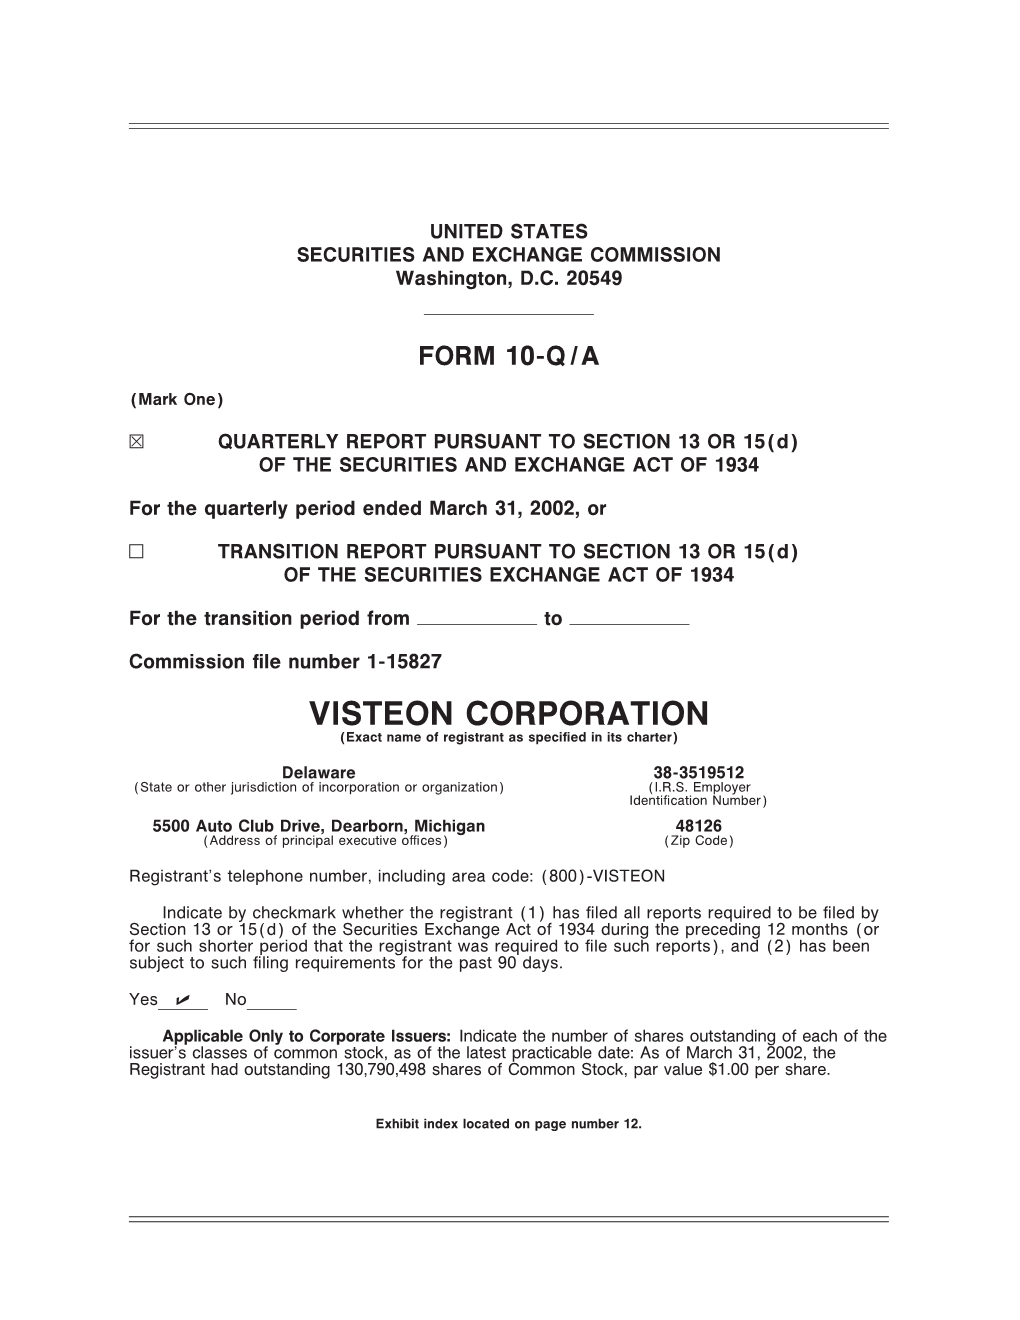 VISTEON CORPORATION (Exact Name of Registrant As Speciñed in Its Charter)